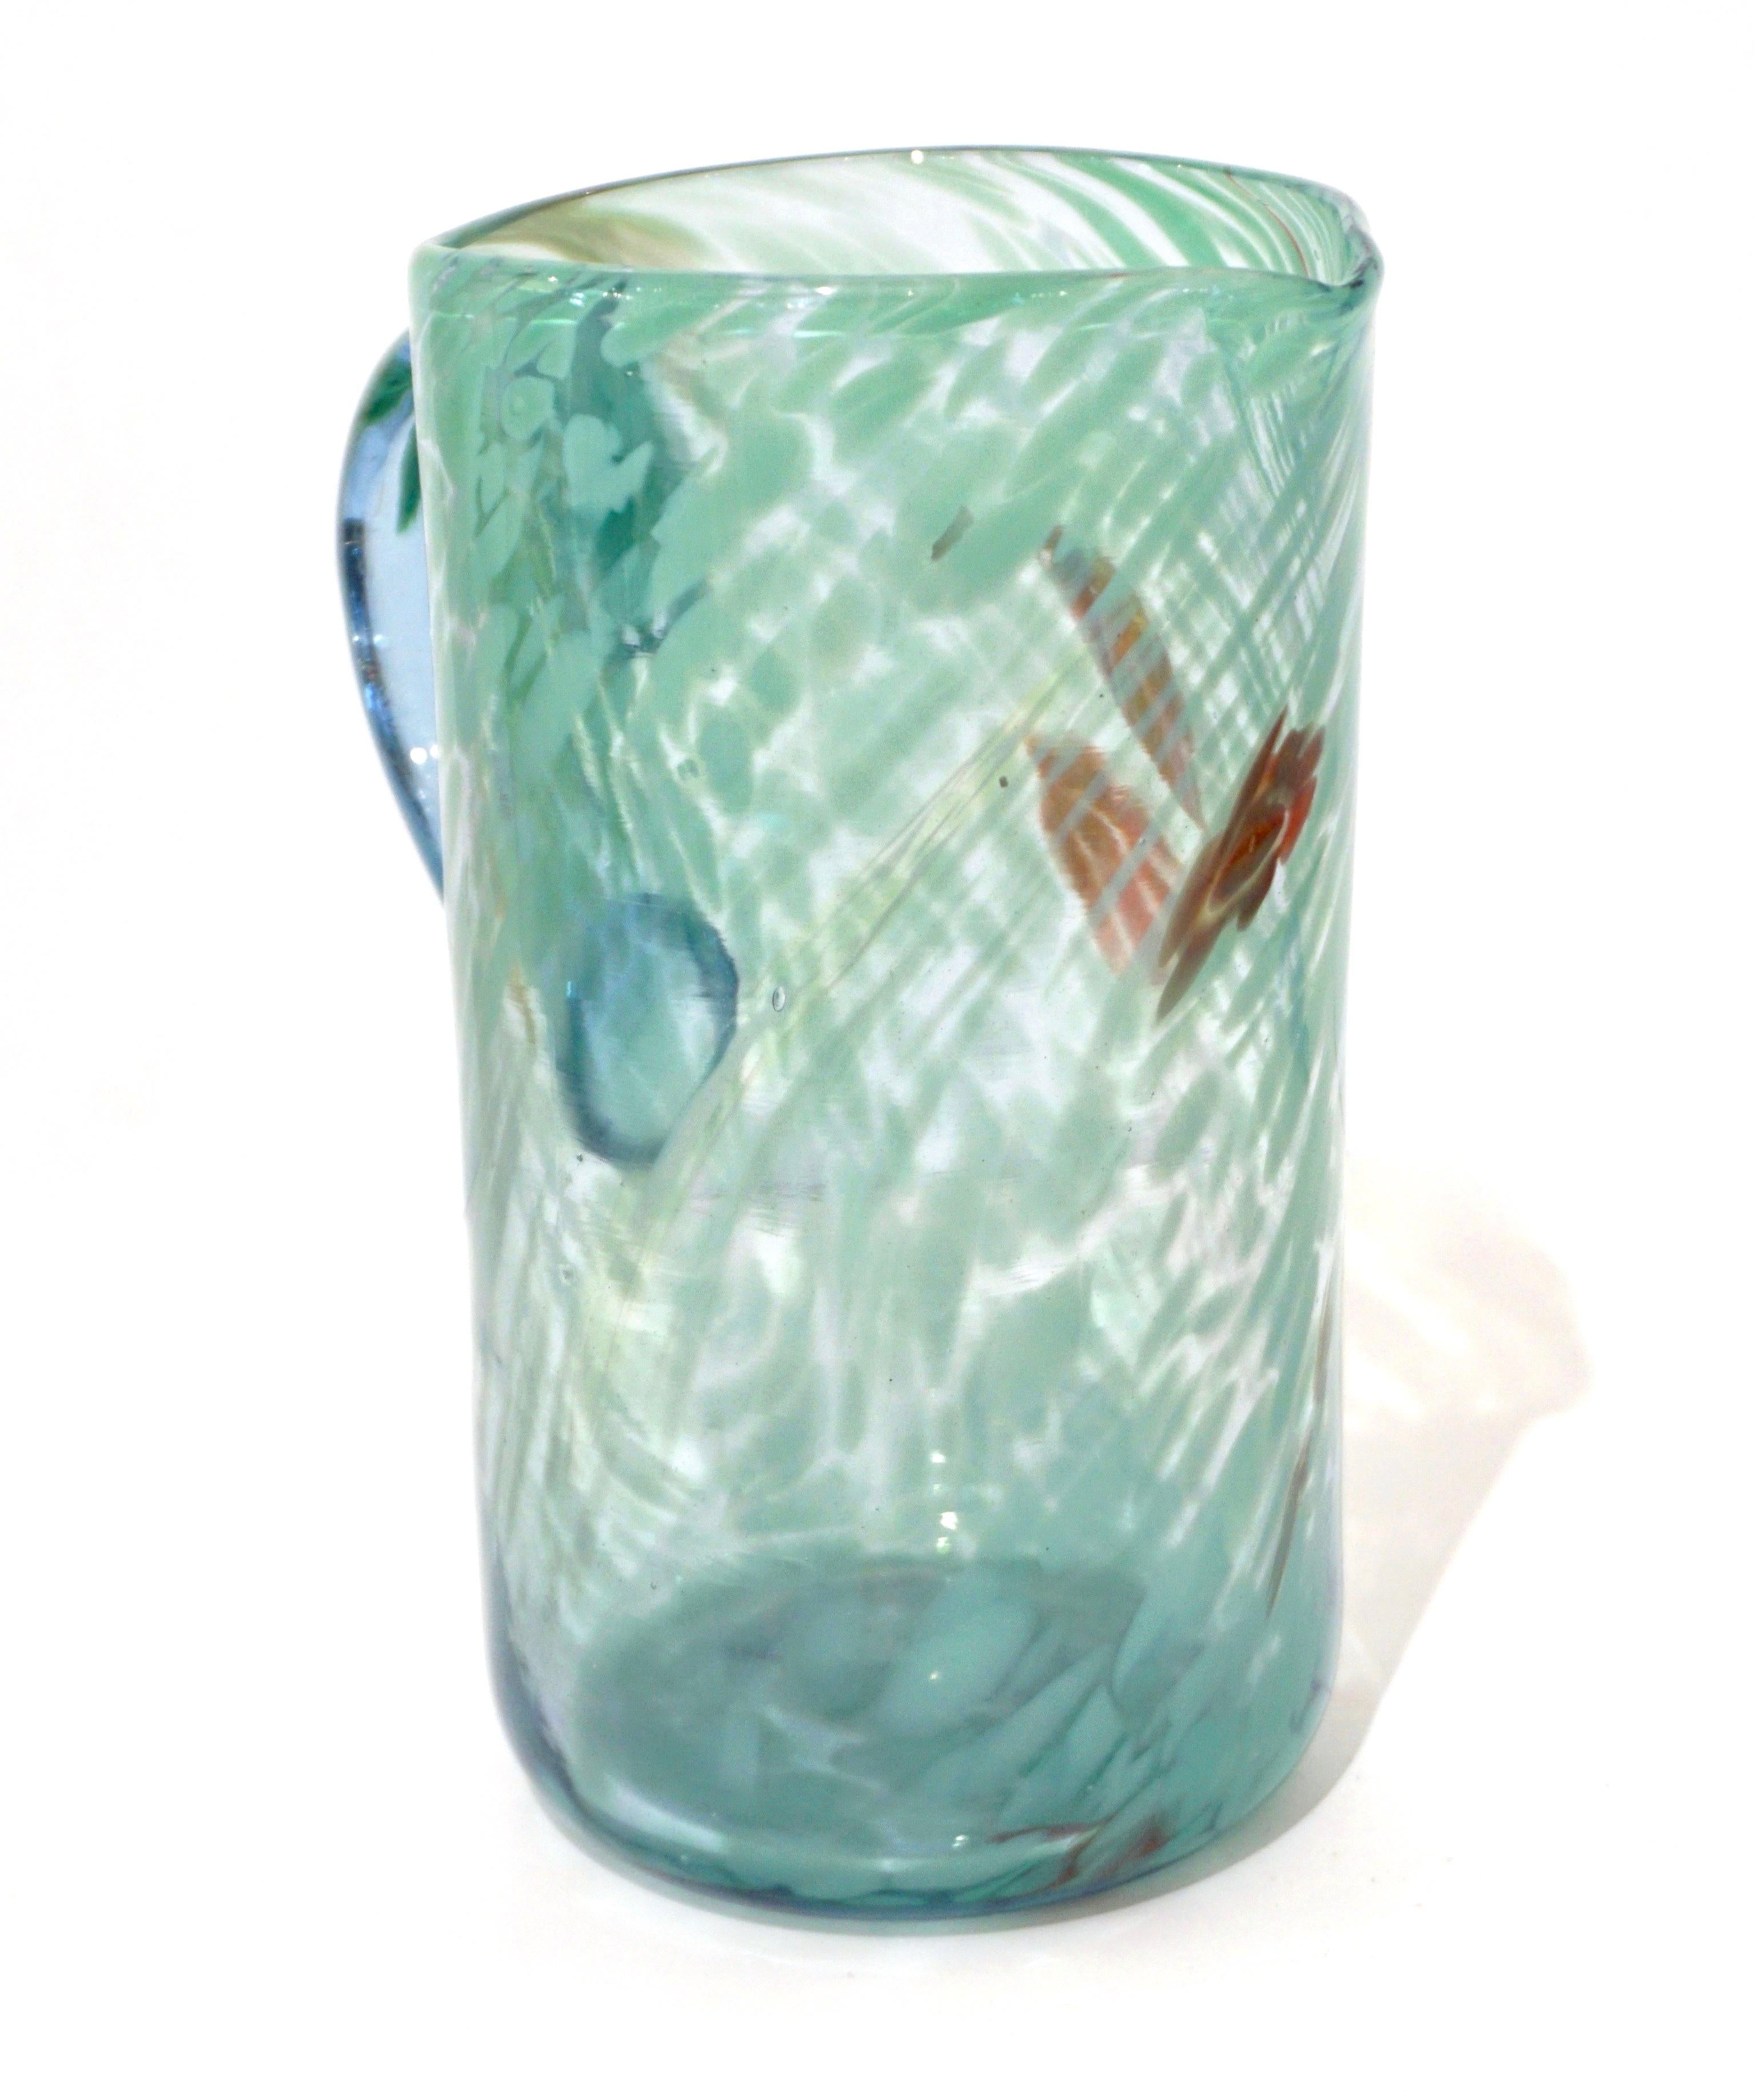 Venetian Handblown jug vase in clear blown Murano glass, unusual for the handle in a different color, aquamarine transparent blue, for the body interestingly decorated like a modern painting that resembles a Monet Lily painting, an exquisite